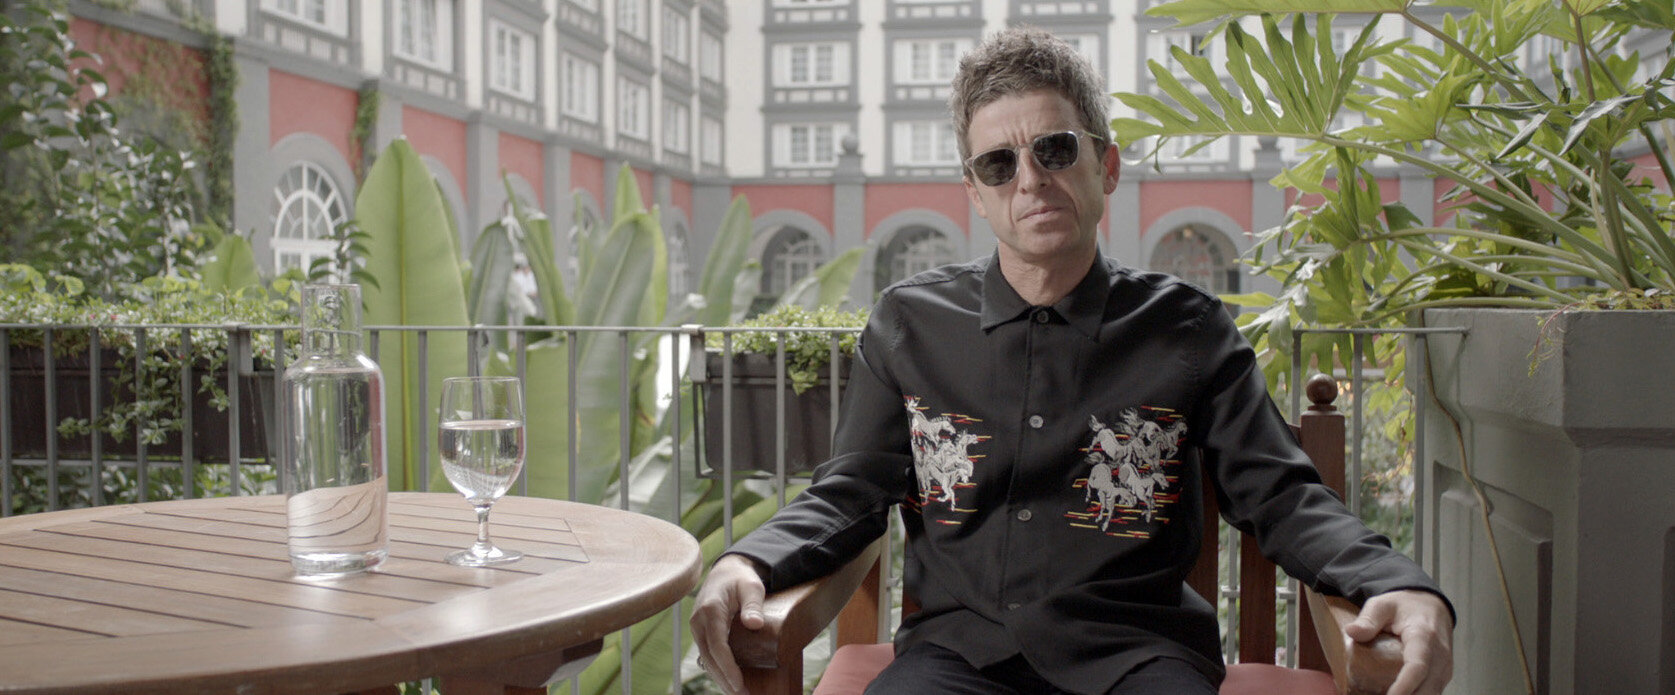 NOEL GALLAGHER: ON THE RECORD